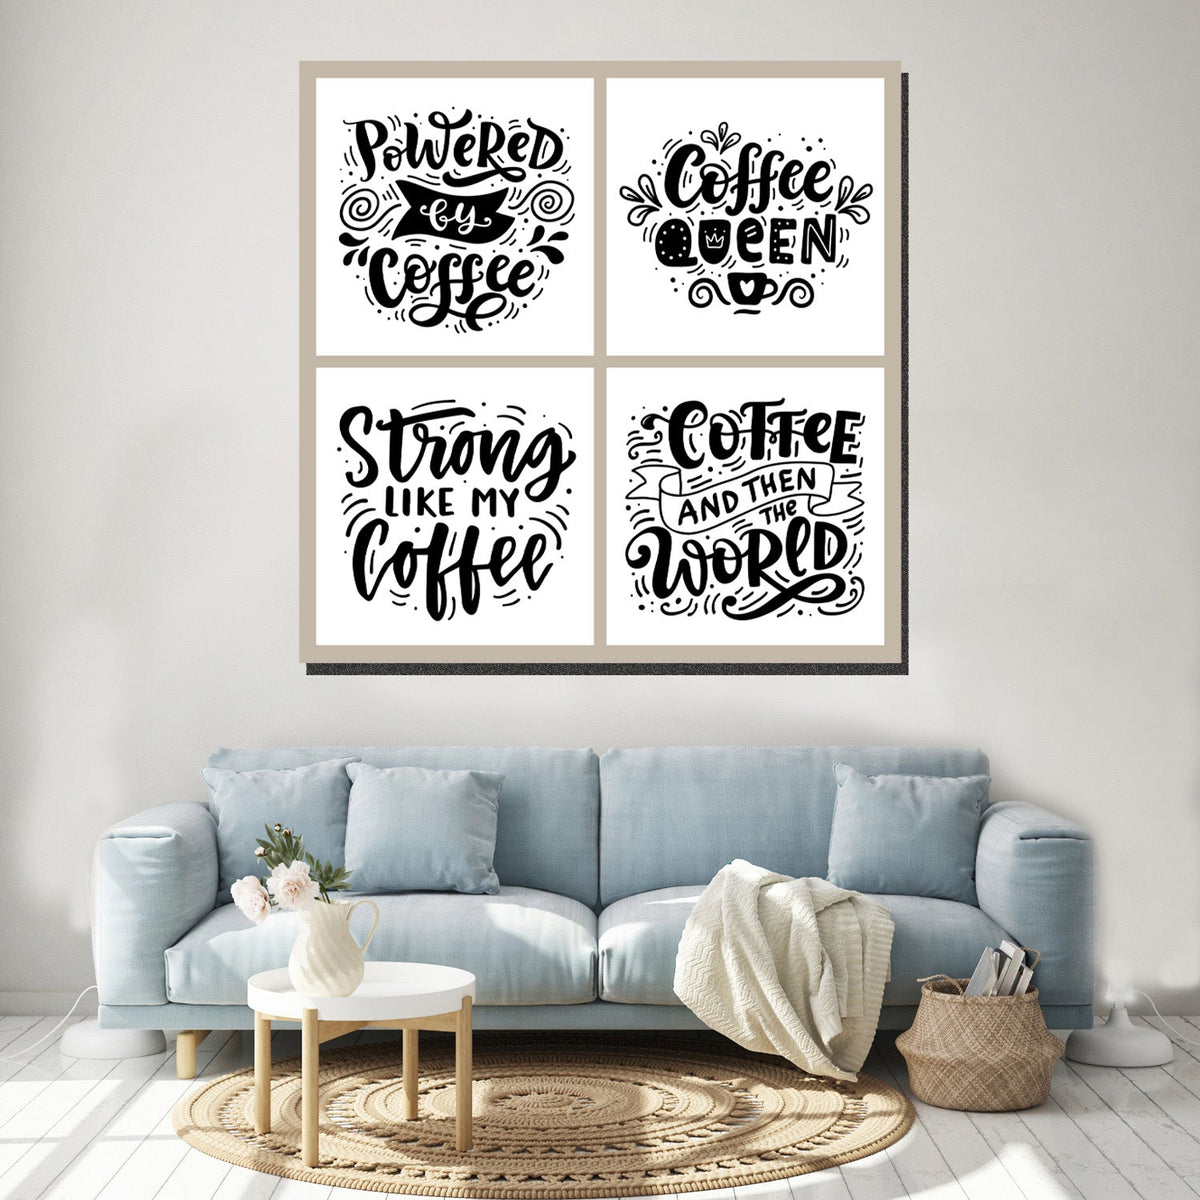 https://cdn.shopify.com/s/files/1/0387/9986/8044/products/CoffeeQueenPosterCanvasArtprintStretched-4.jpg